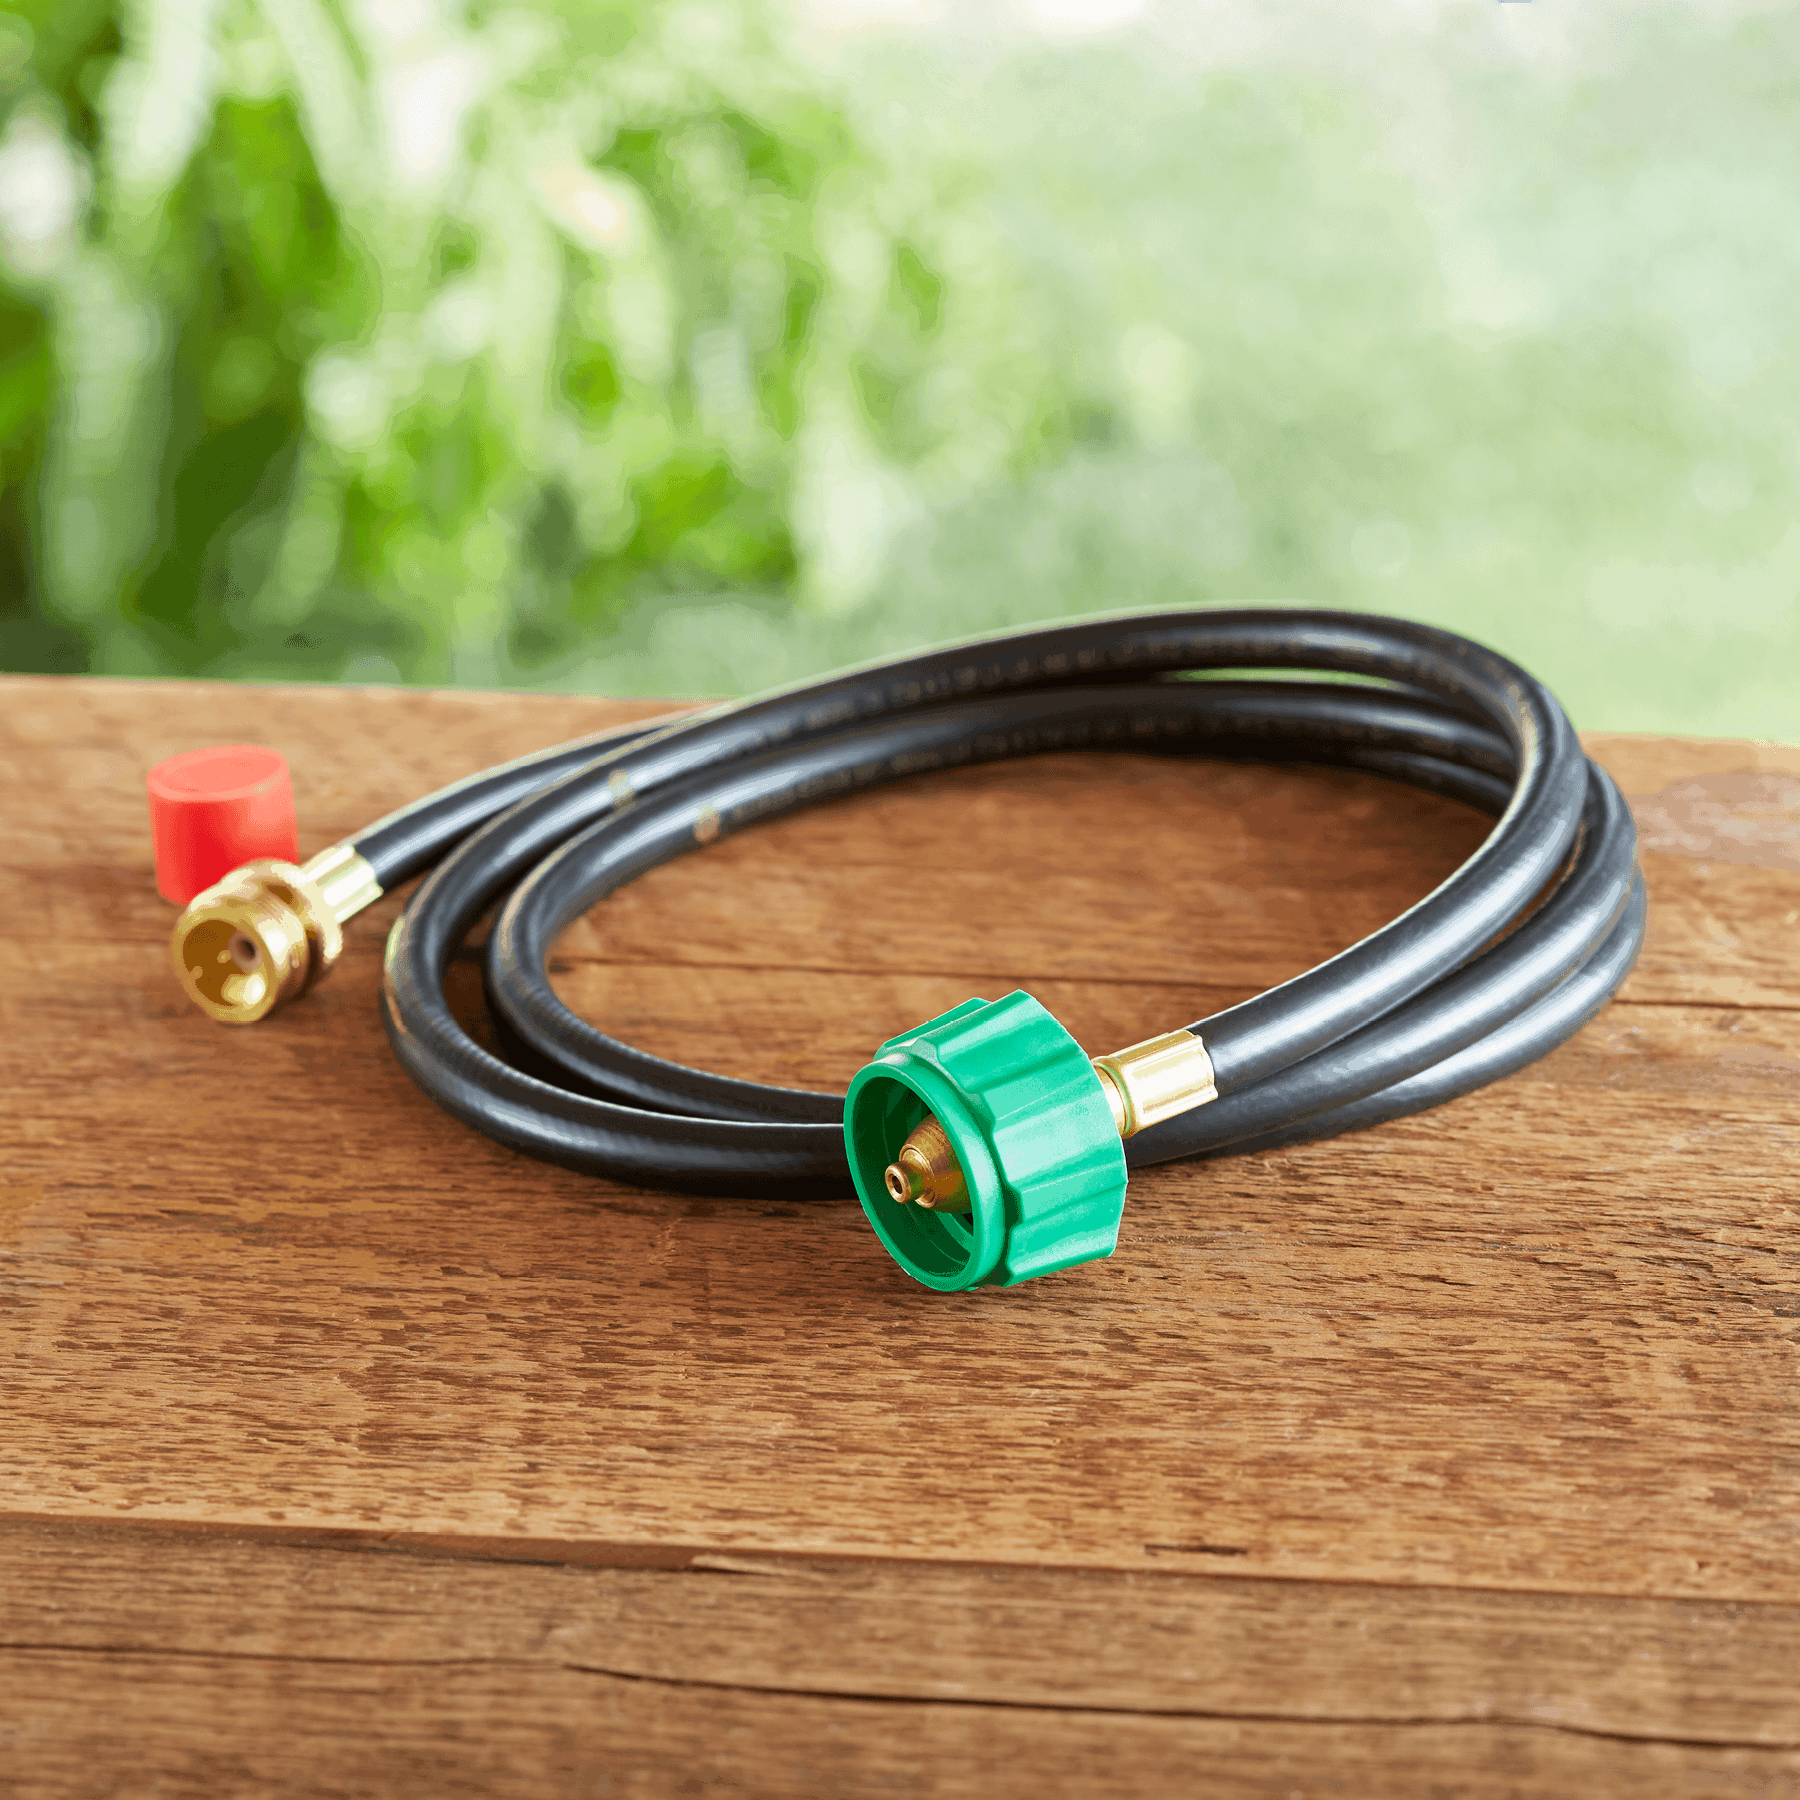 Details about   DOZYANT 5 FT Propane Hose Adapter with Propane Tank Gauge for Q1200 1000 Grill 